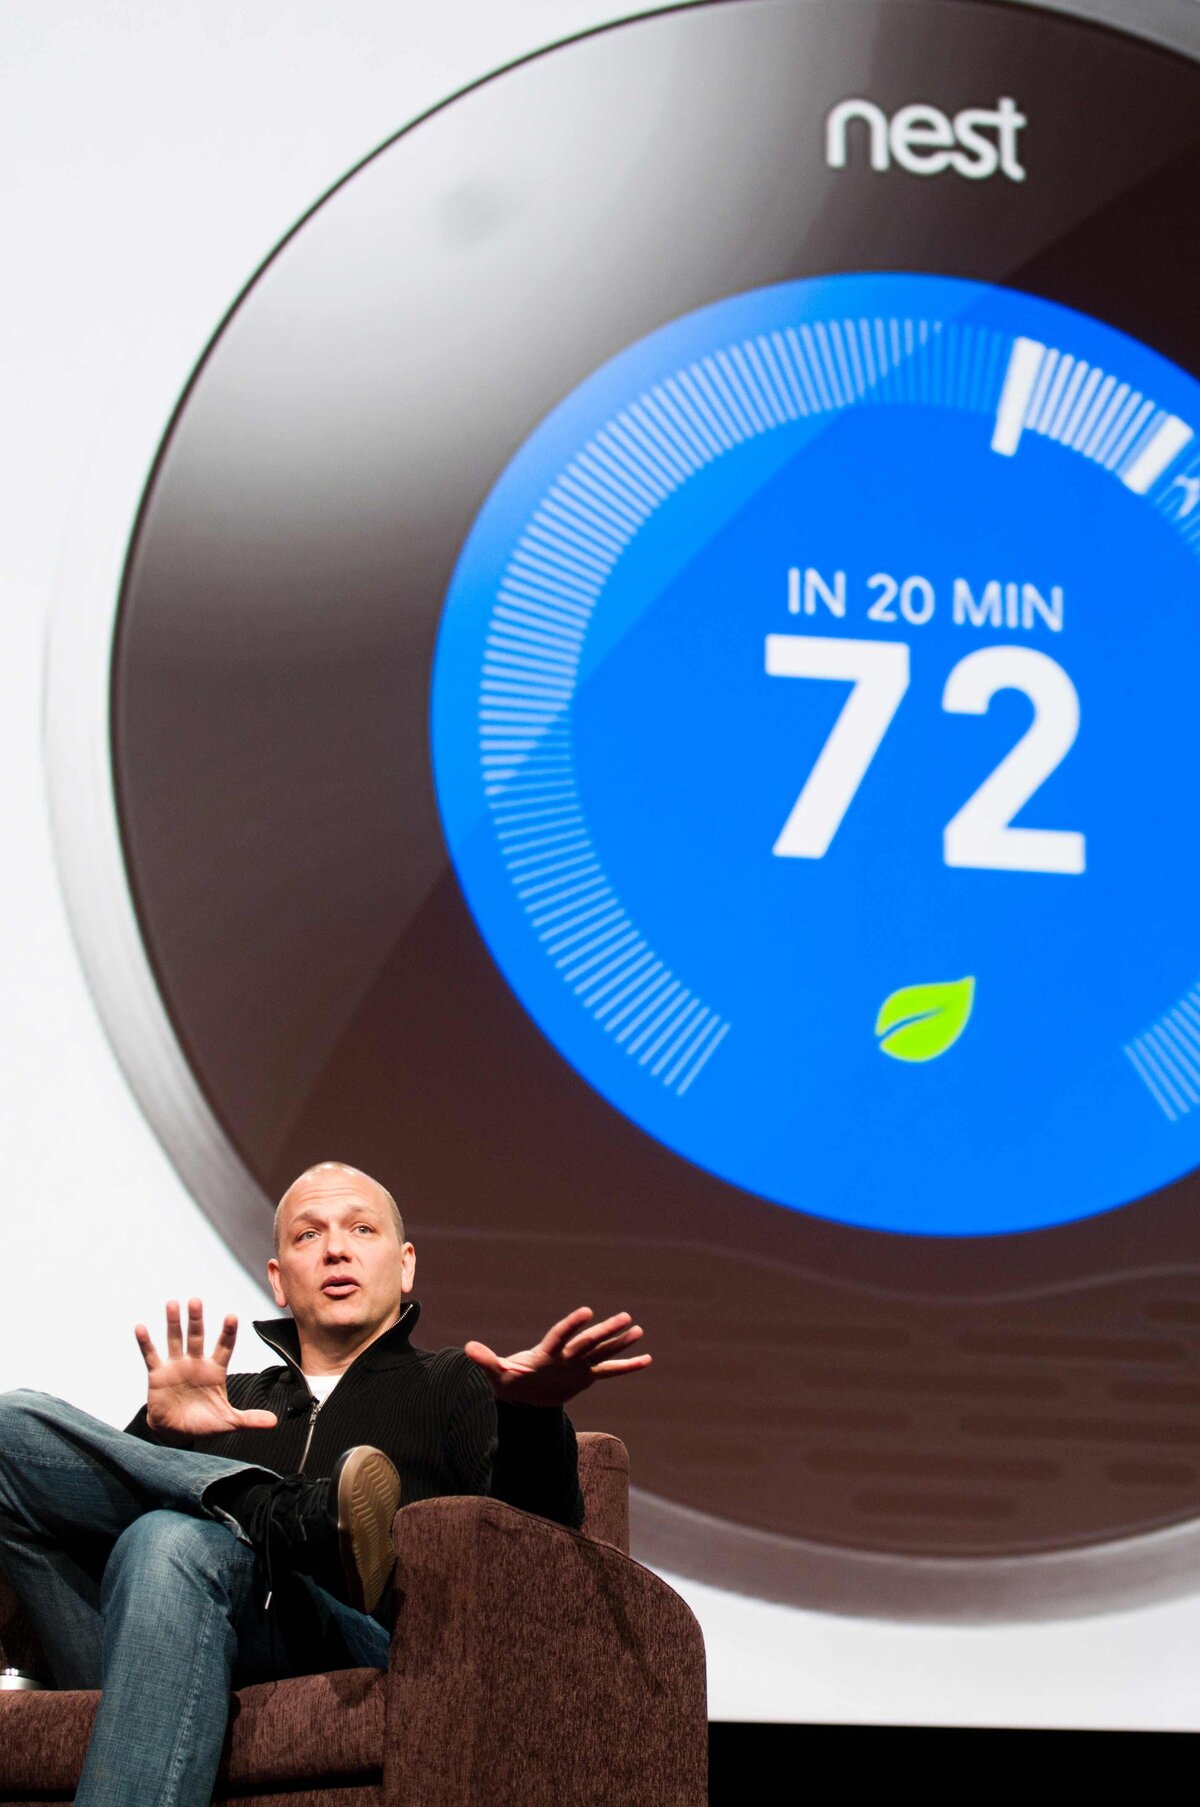 Nest Founder who also designed at Apple speaks with Nest displayed behind him.